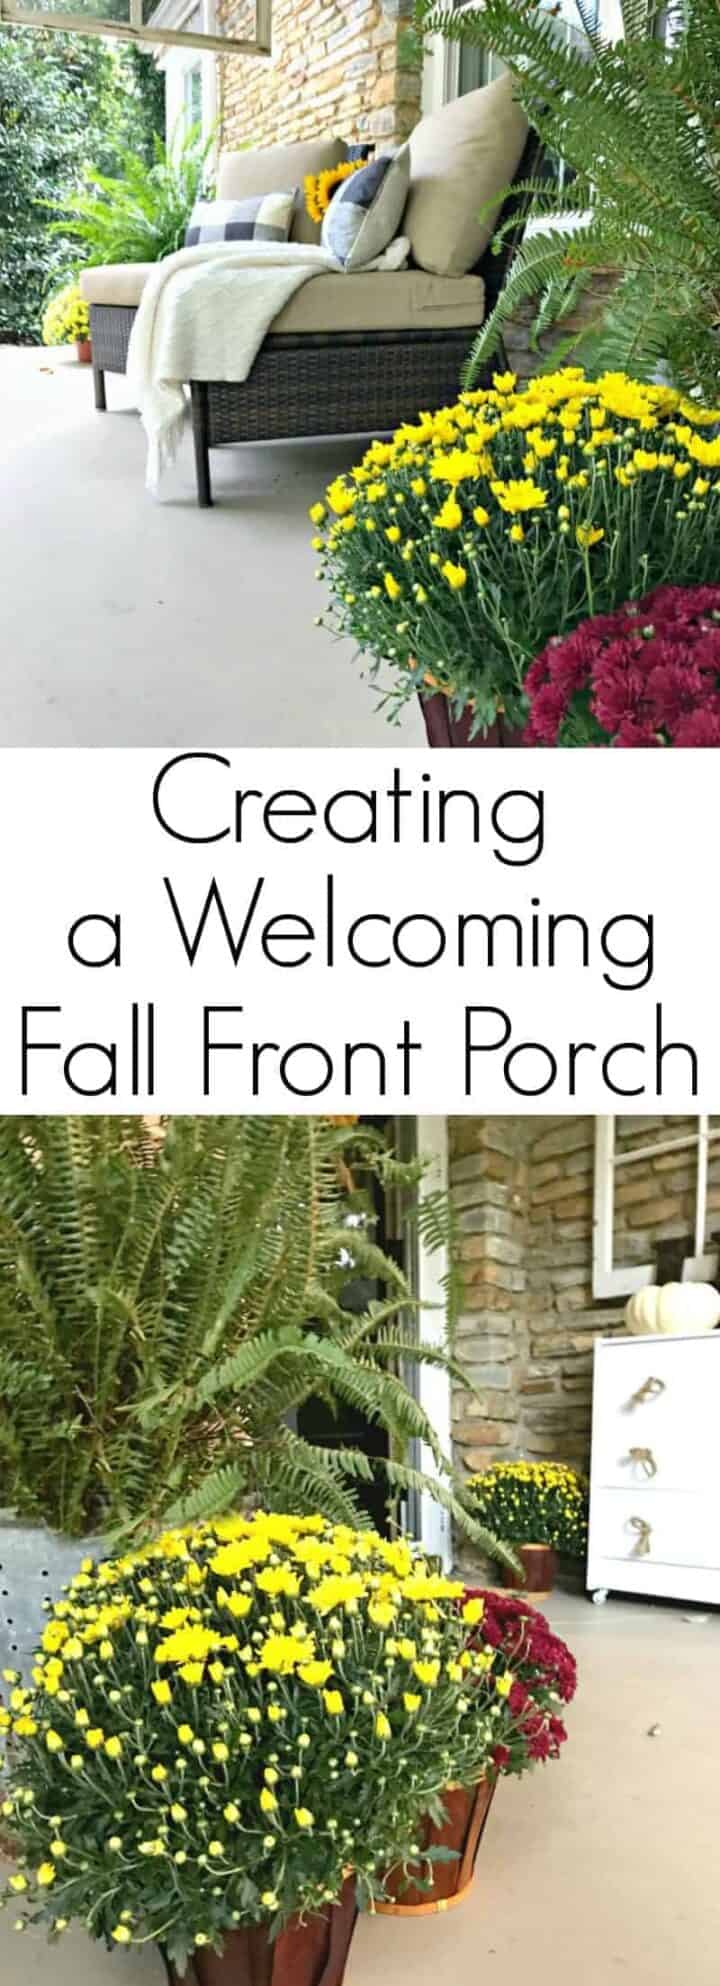 fall front porch decorations